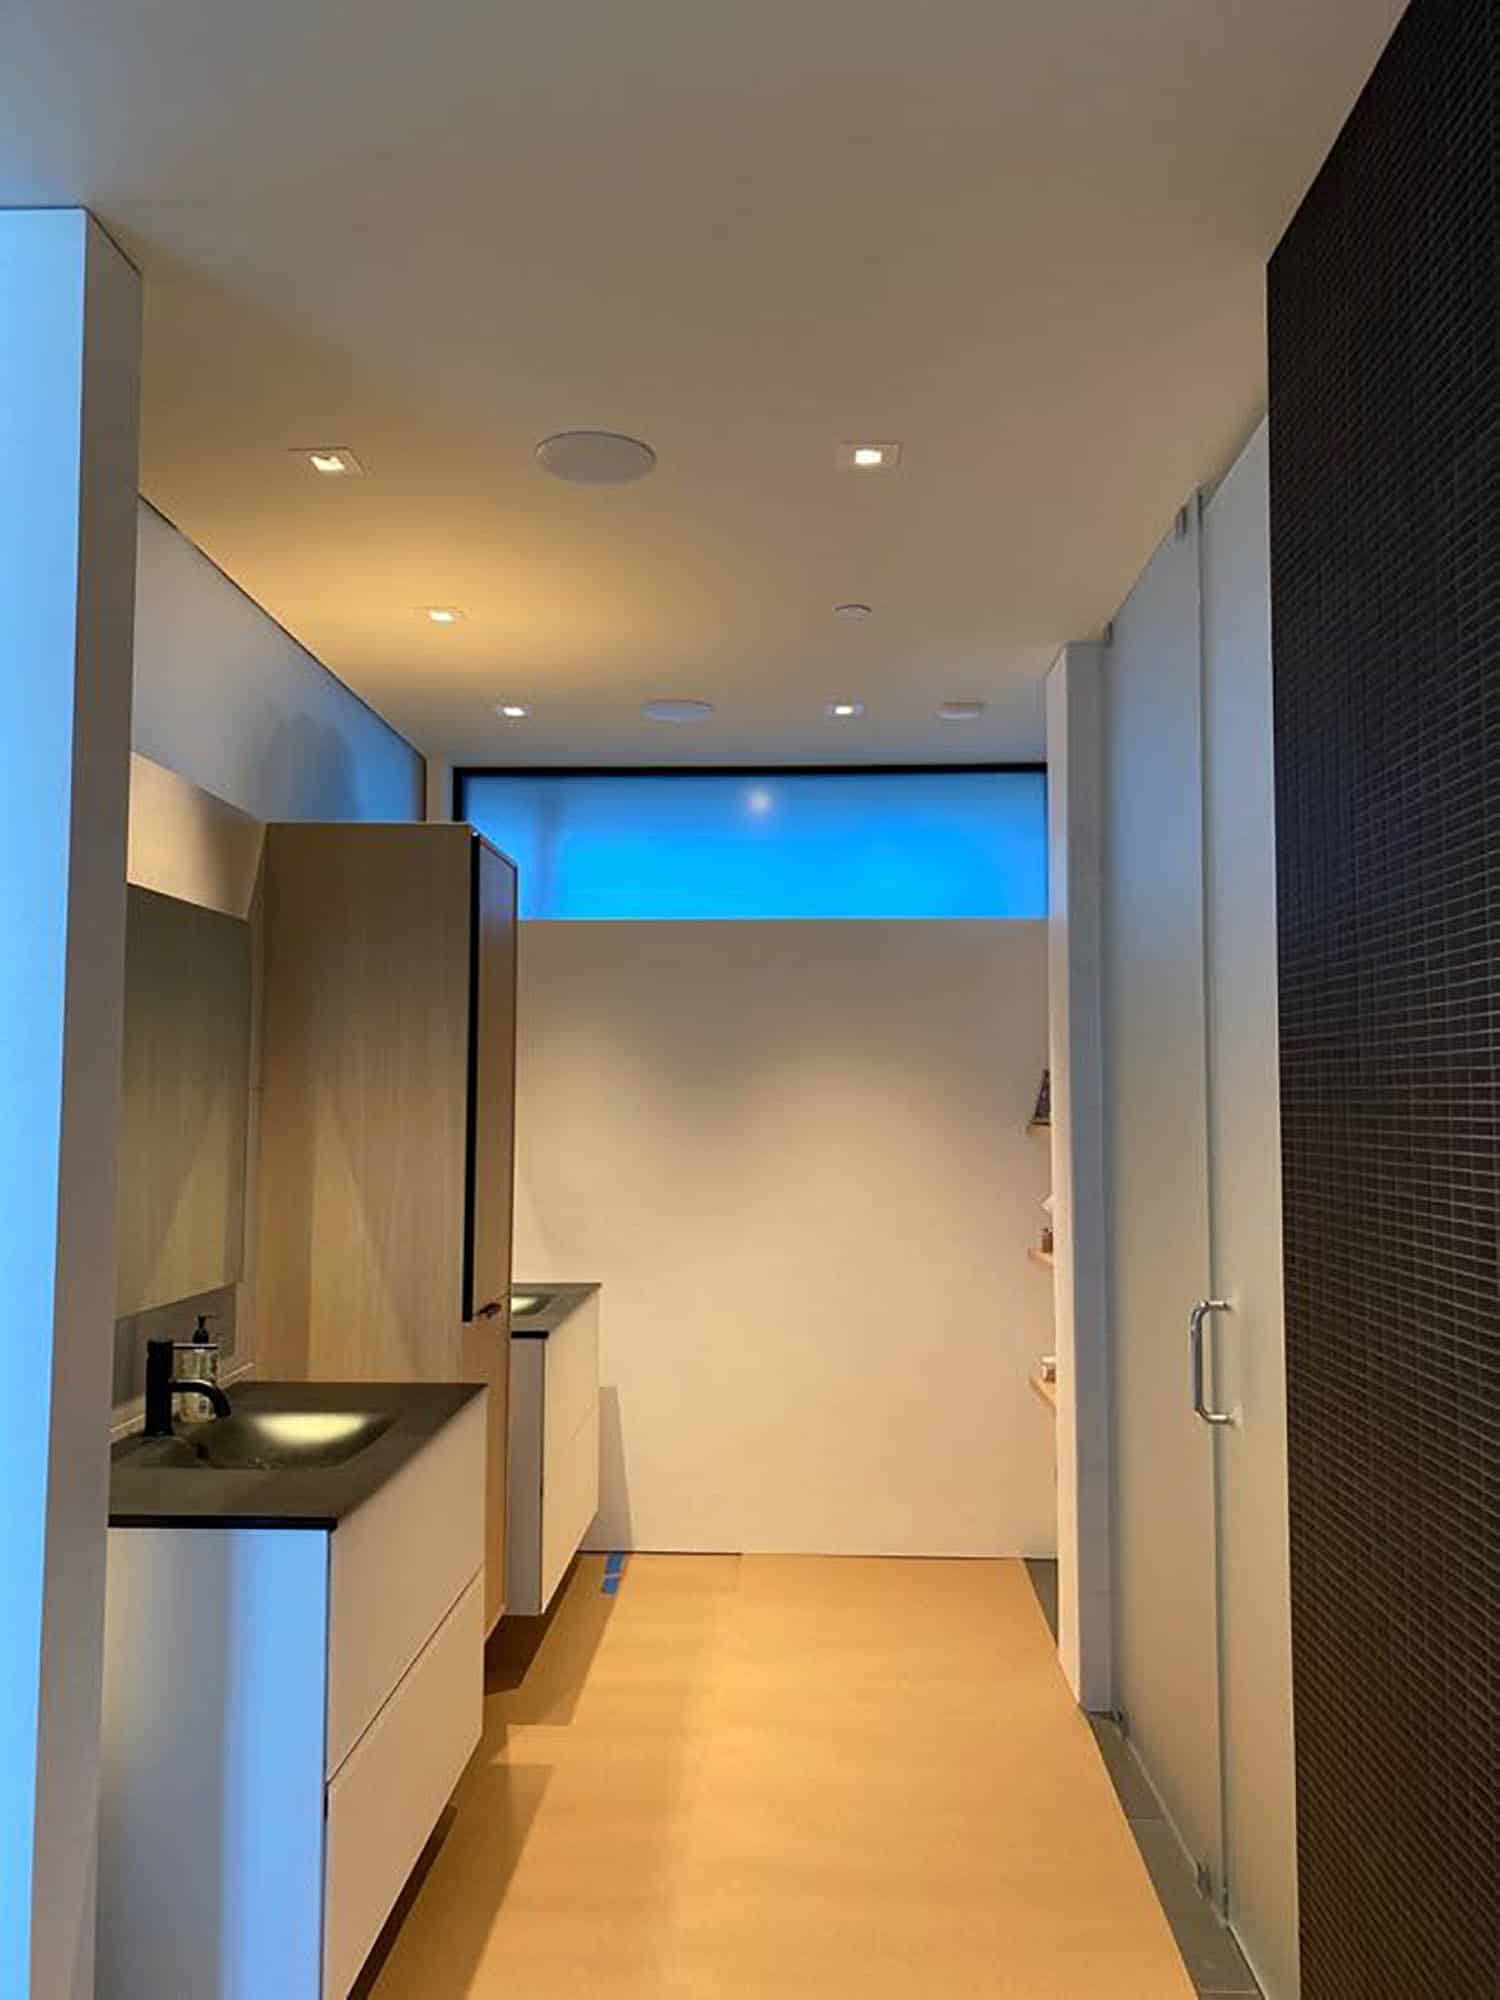 3M Fasara Matte Crystal film transform this Tiburon bathroom and closet. Installed by ClimatePro.